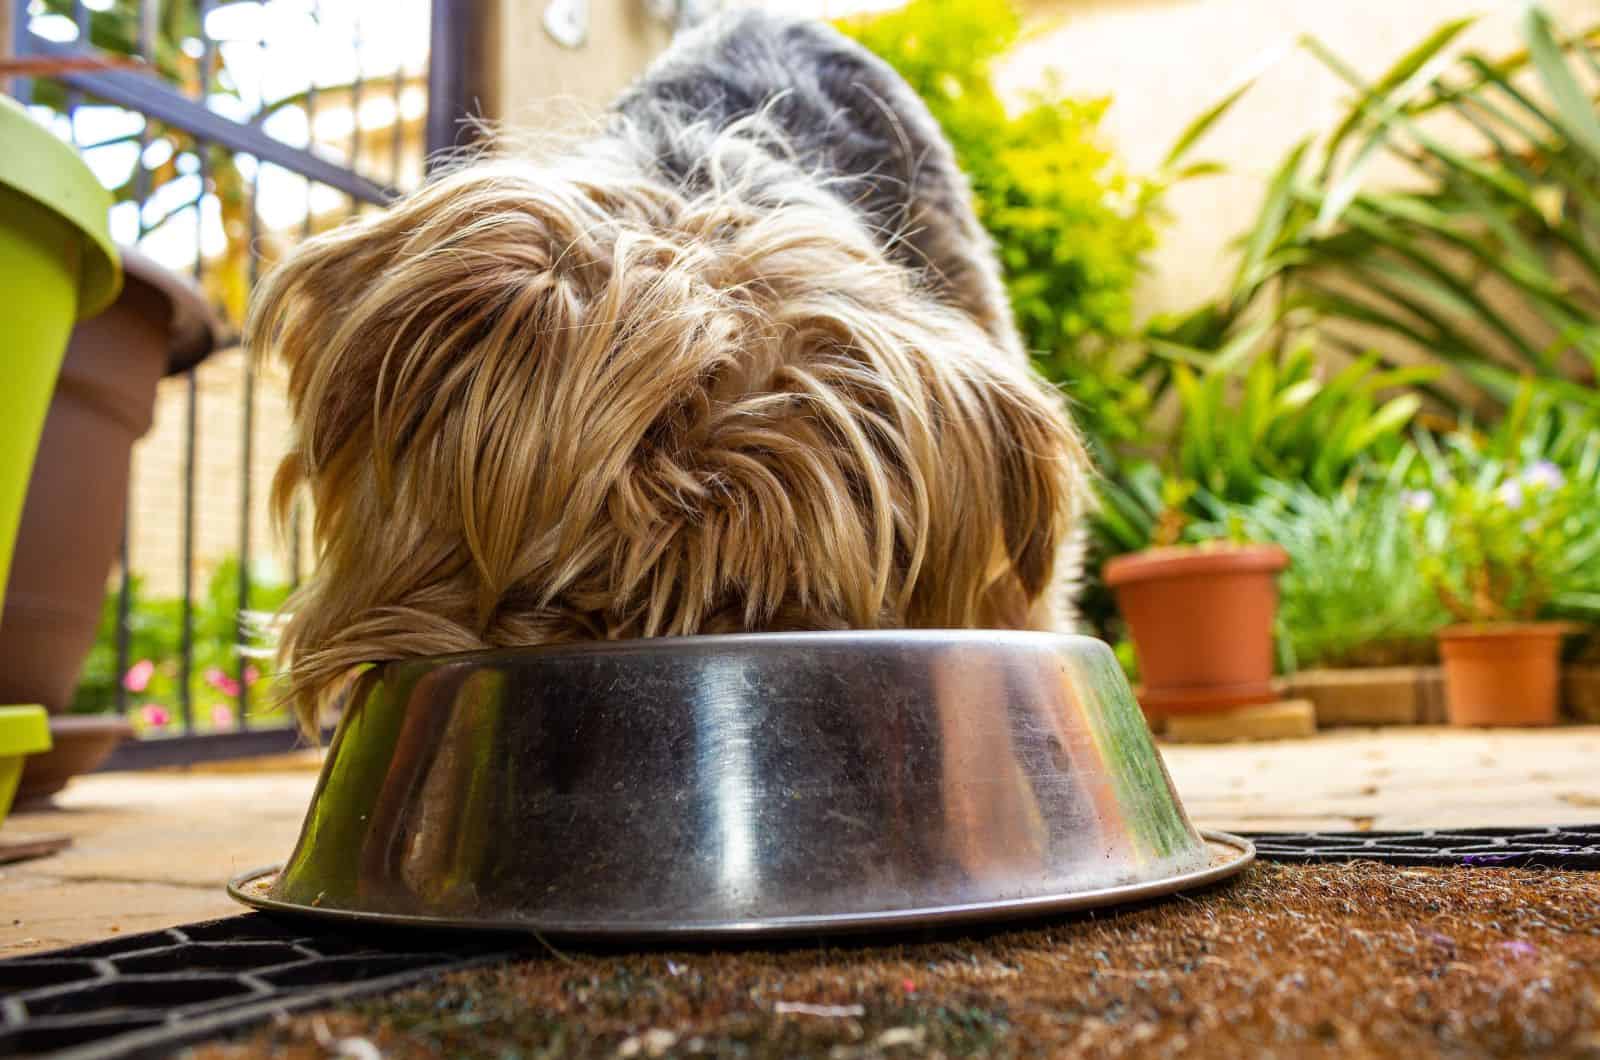 Yorkie eating from bowl